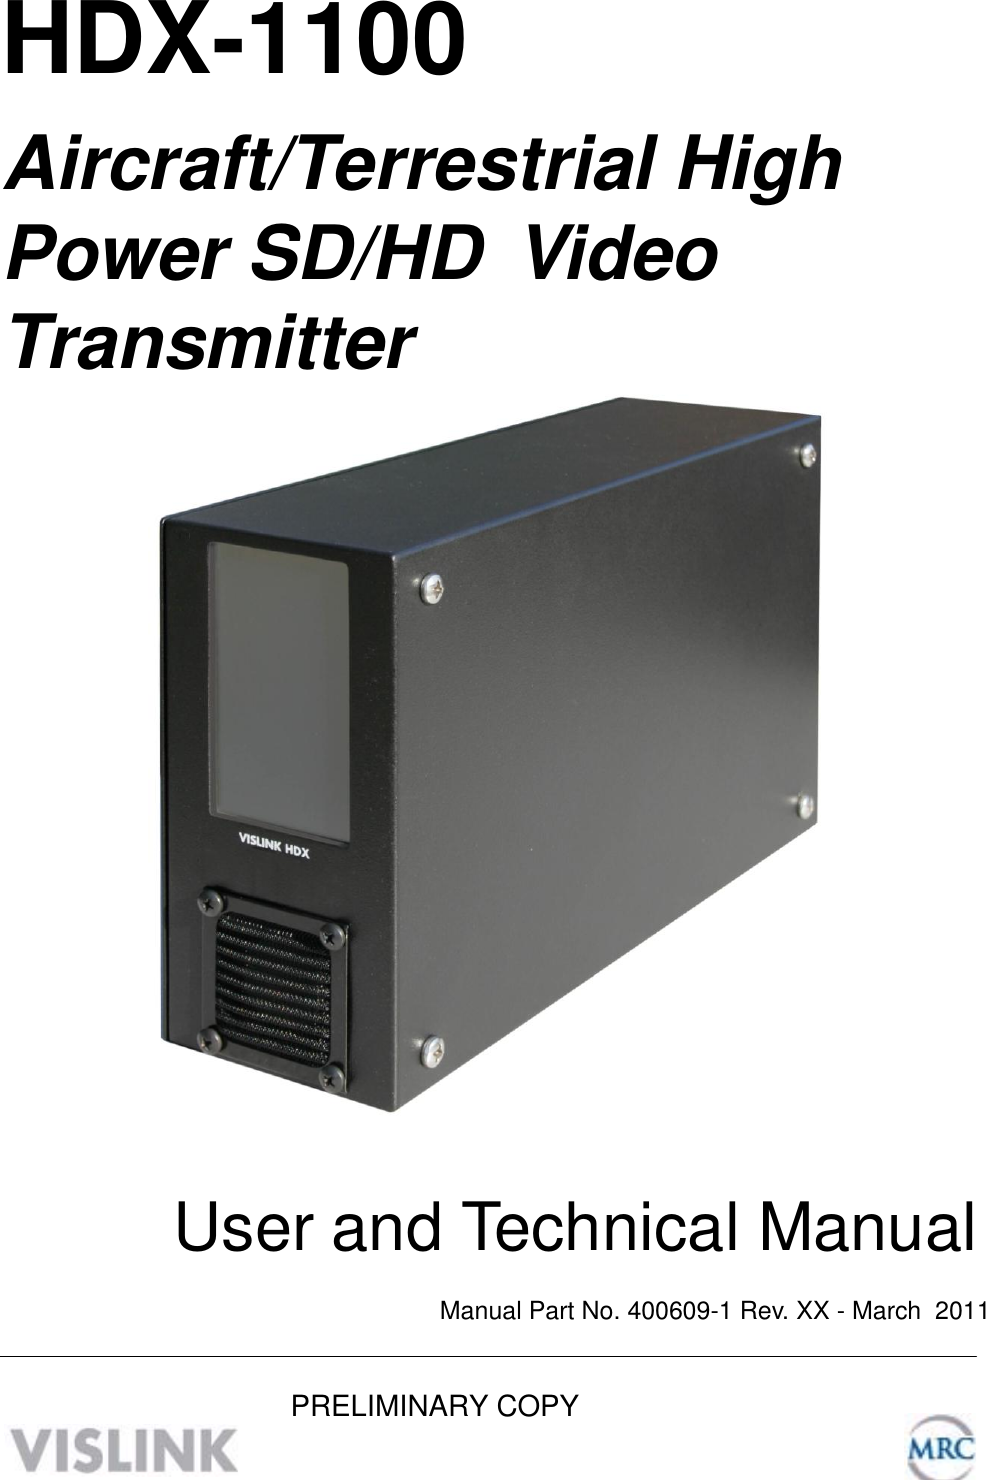       HDX-1100  Aircraft/Terrestrial High Power SD/HD  Video Transmitter                                       User and Technical Manual  Manual Part No. 400609-1 Rev. XX - March  2011            PRELIMINARY COPY